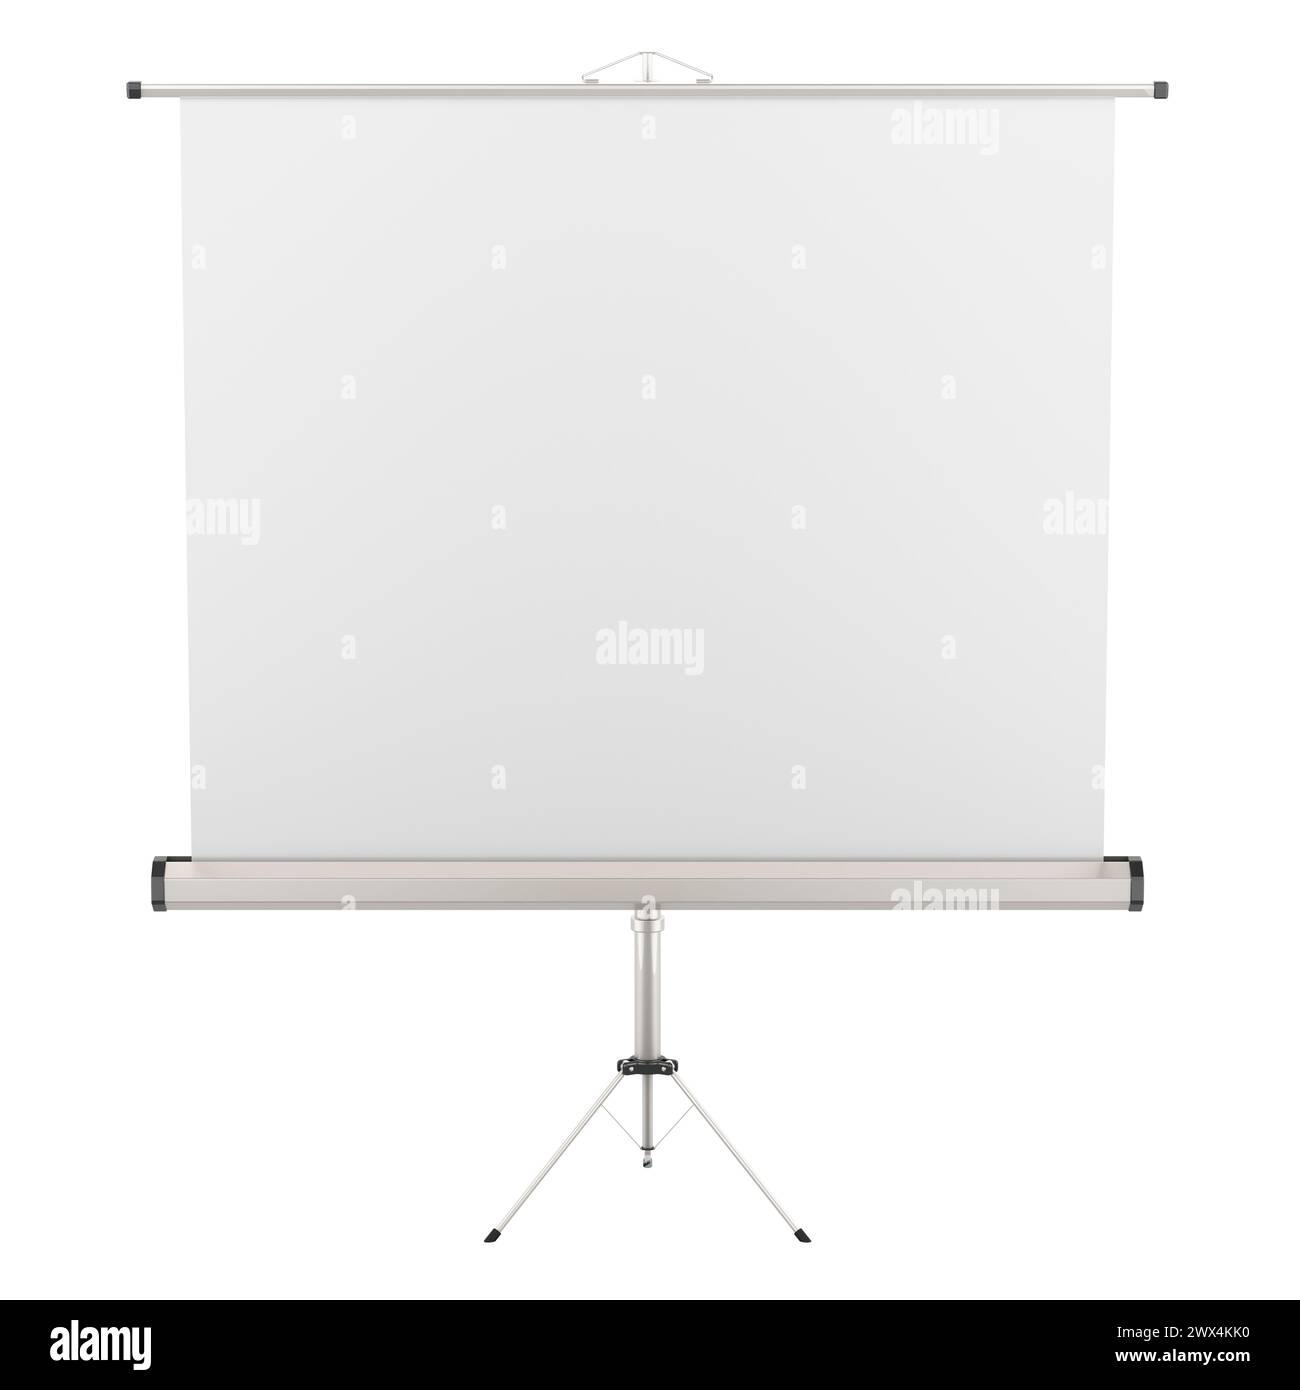 Projector screen with stand, 3D rendering isolated on white background Stock Photo